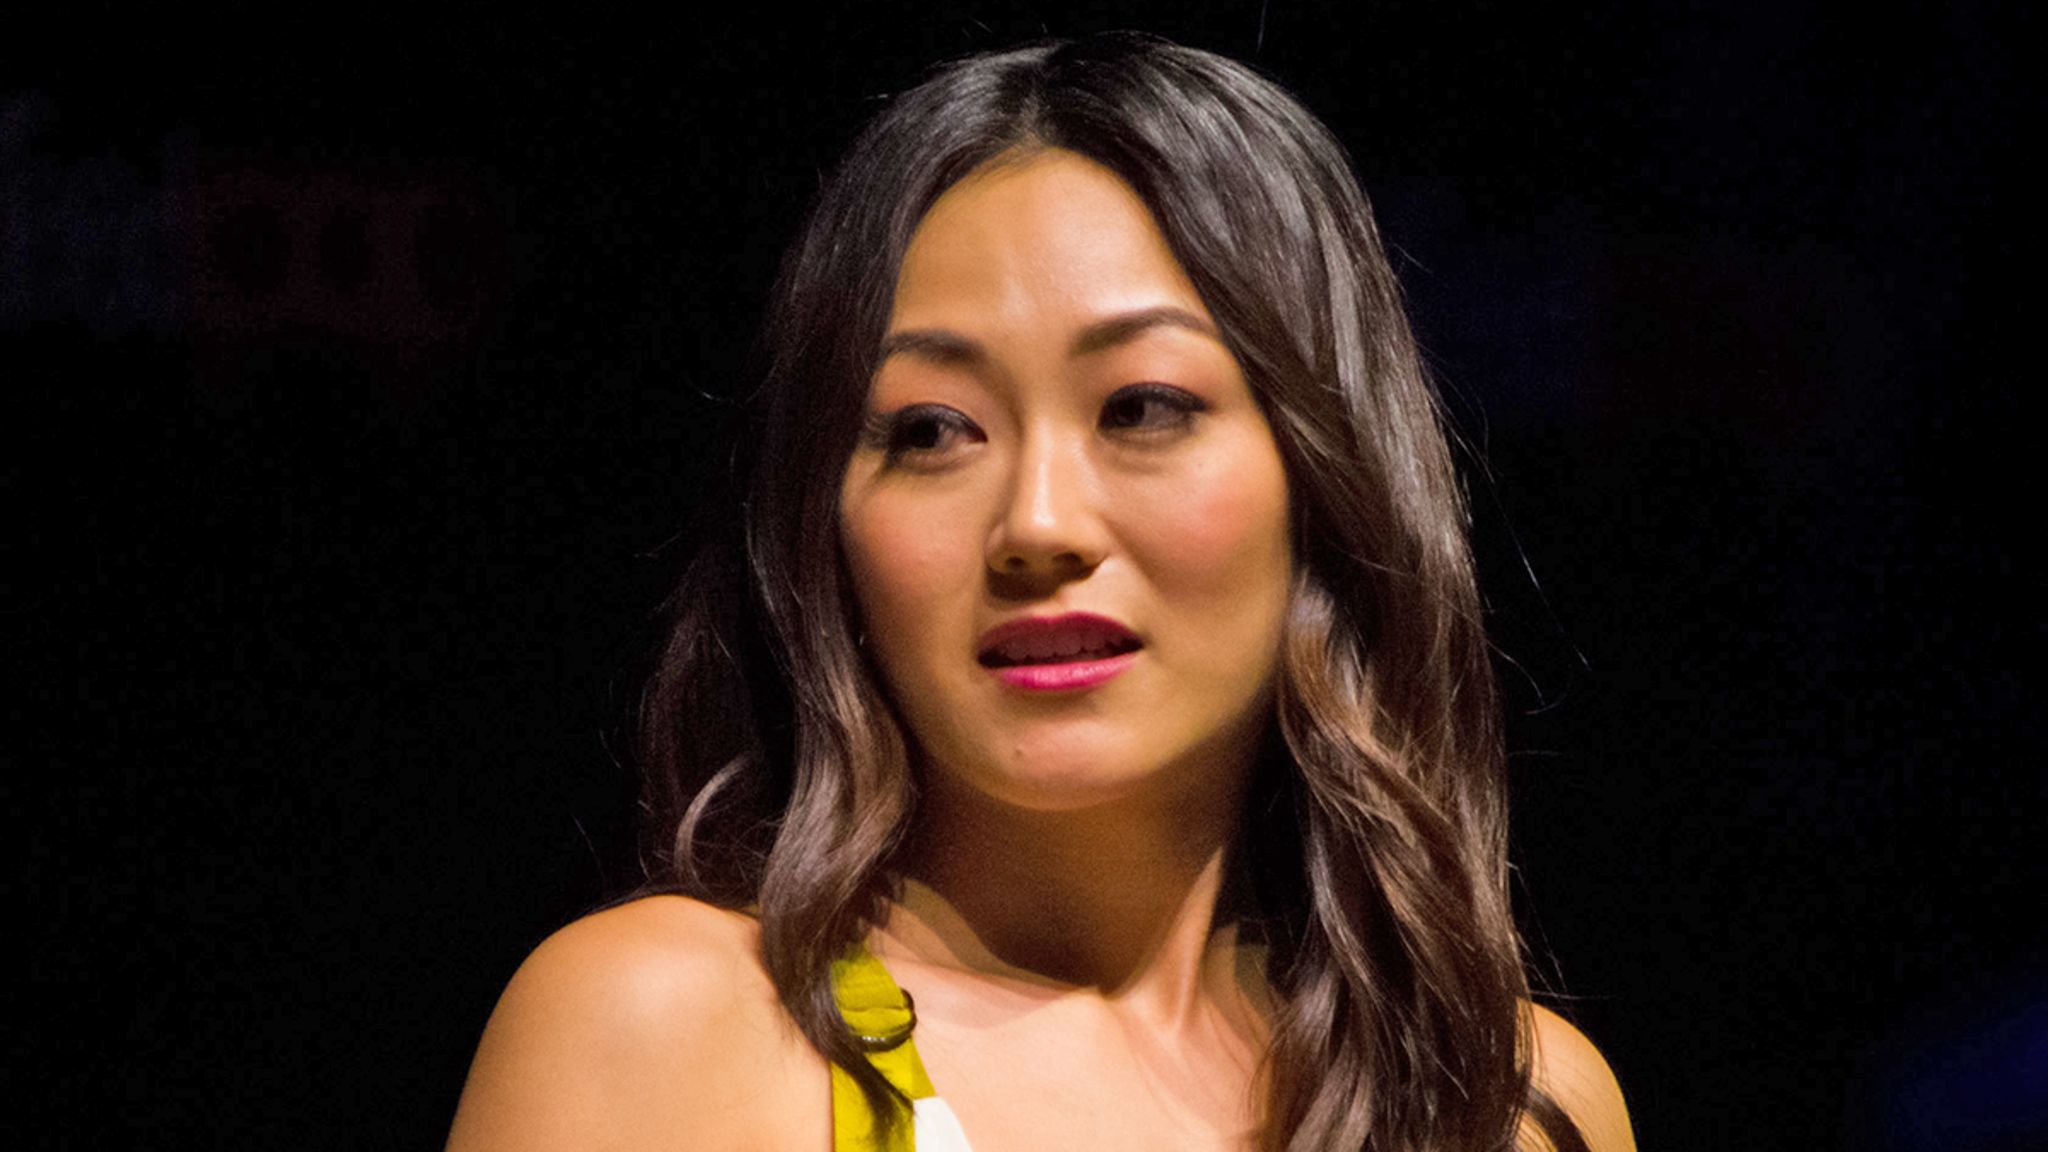 ‘The Boys’ Star Karen Fukuhara Says She Was Assaulted in ‘Hate Crime’